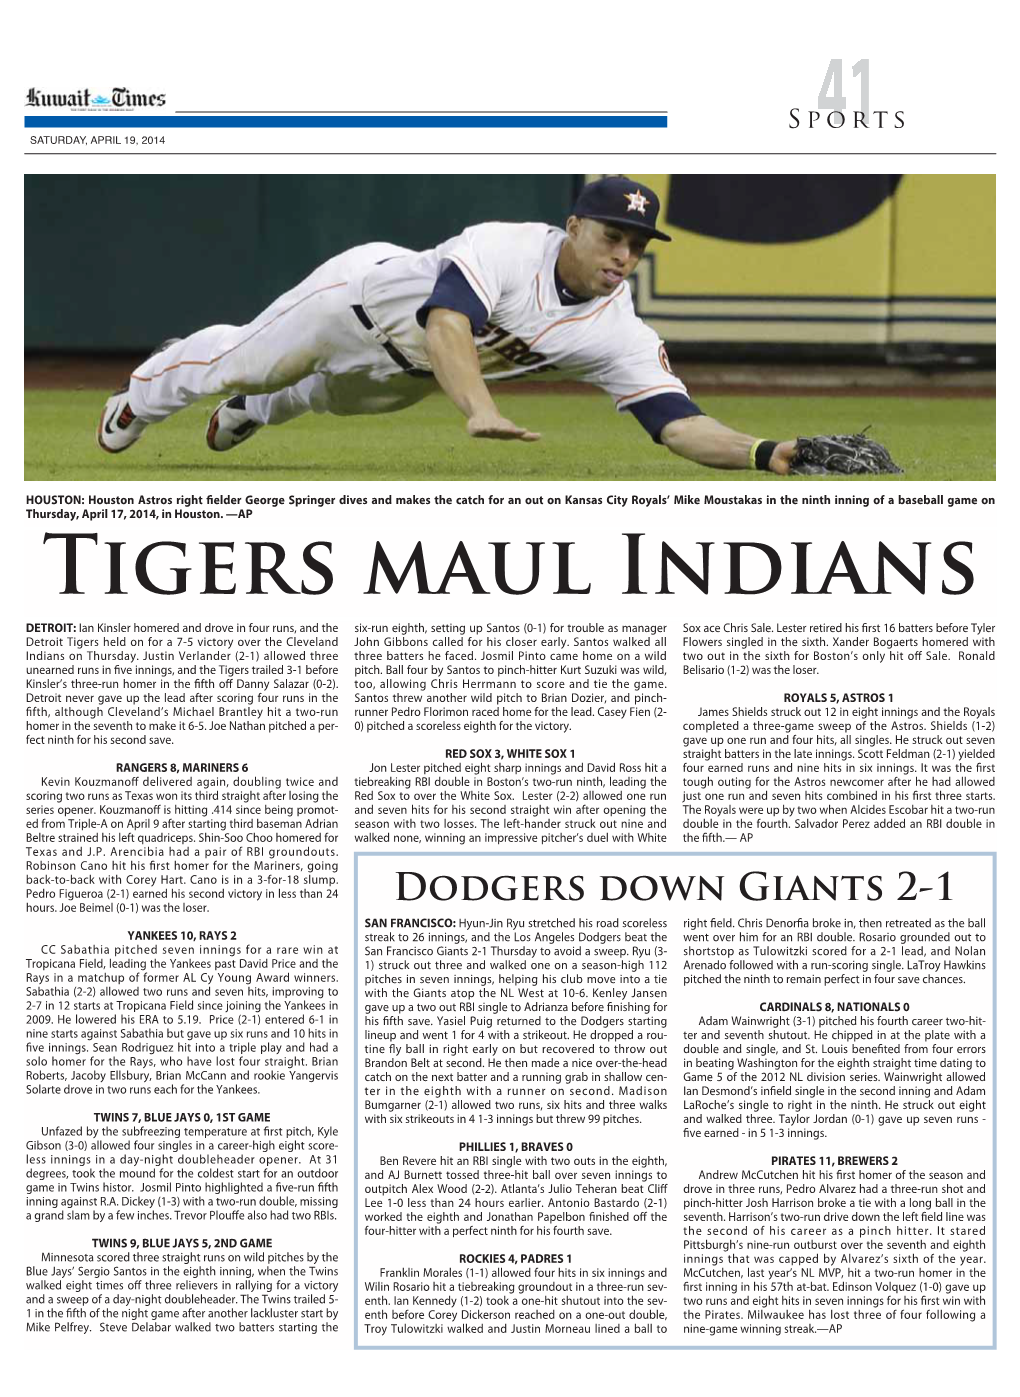 Tigers Maul Indians